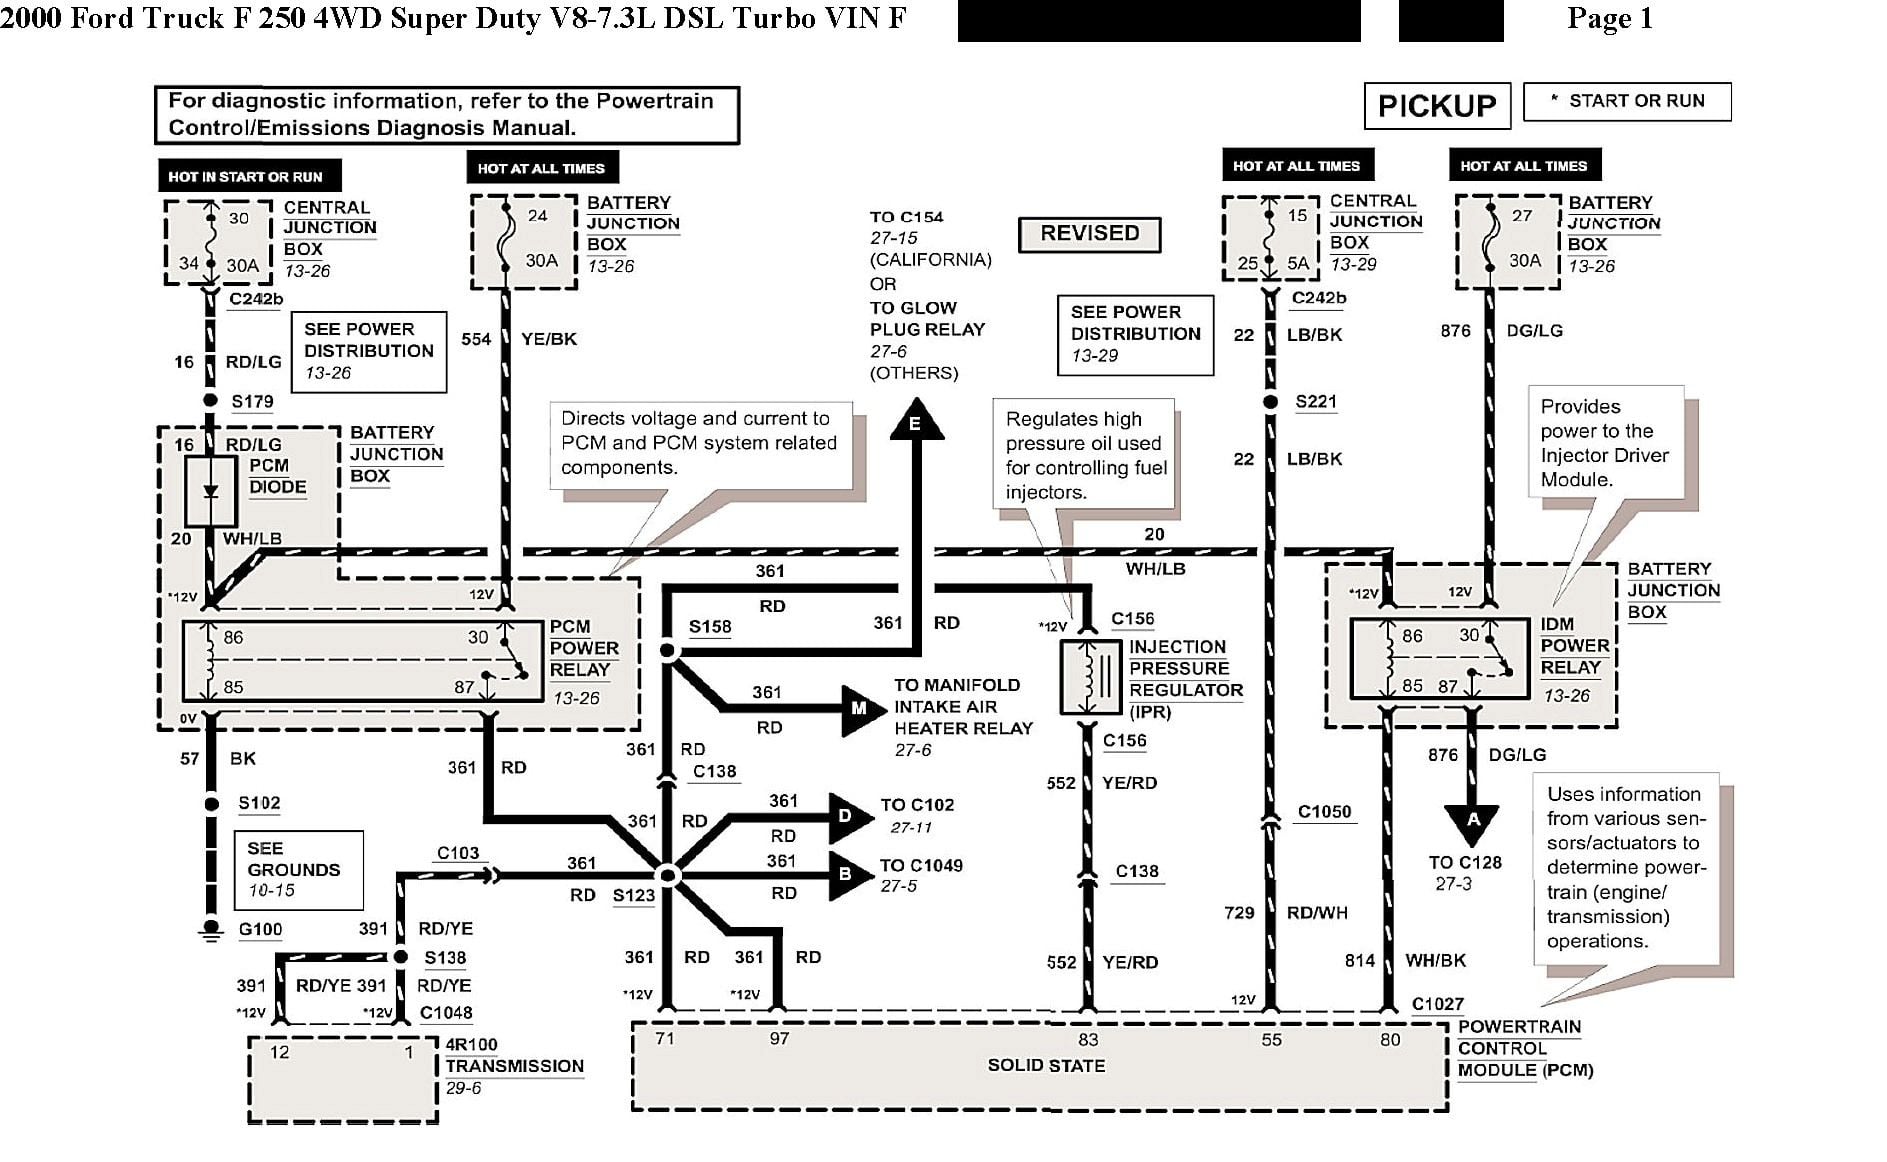 Need IPR wiring info-diagram, quickly please (2000) - Ford Truck  Enthusiasts Forums Wiring Diagram Transmission Ford Truck Enthusiasts